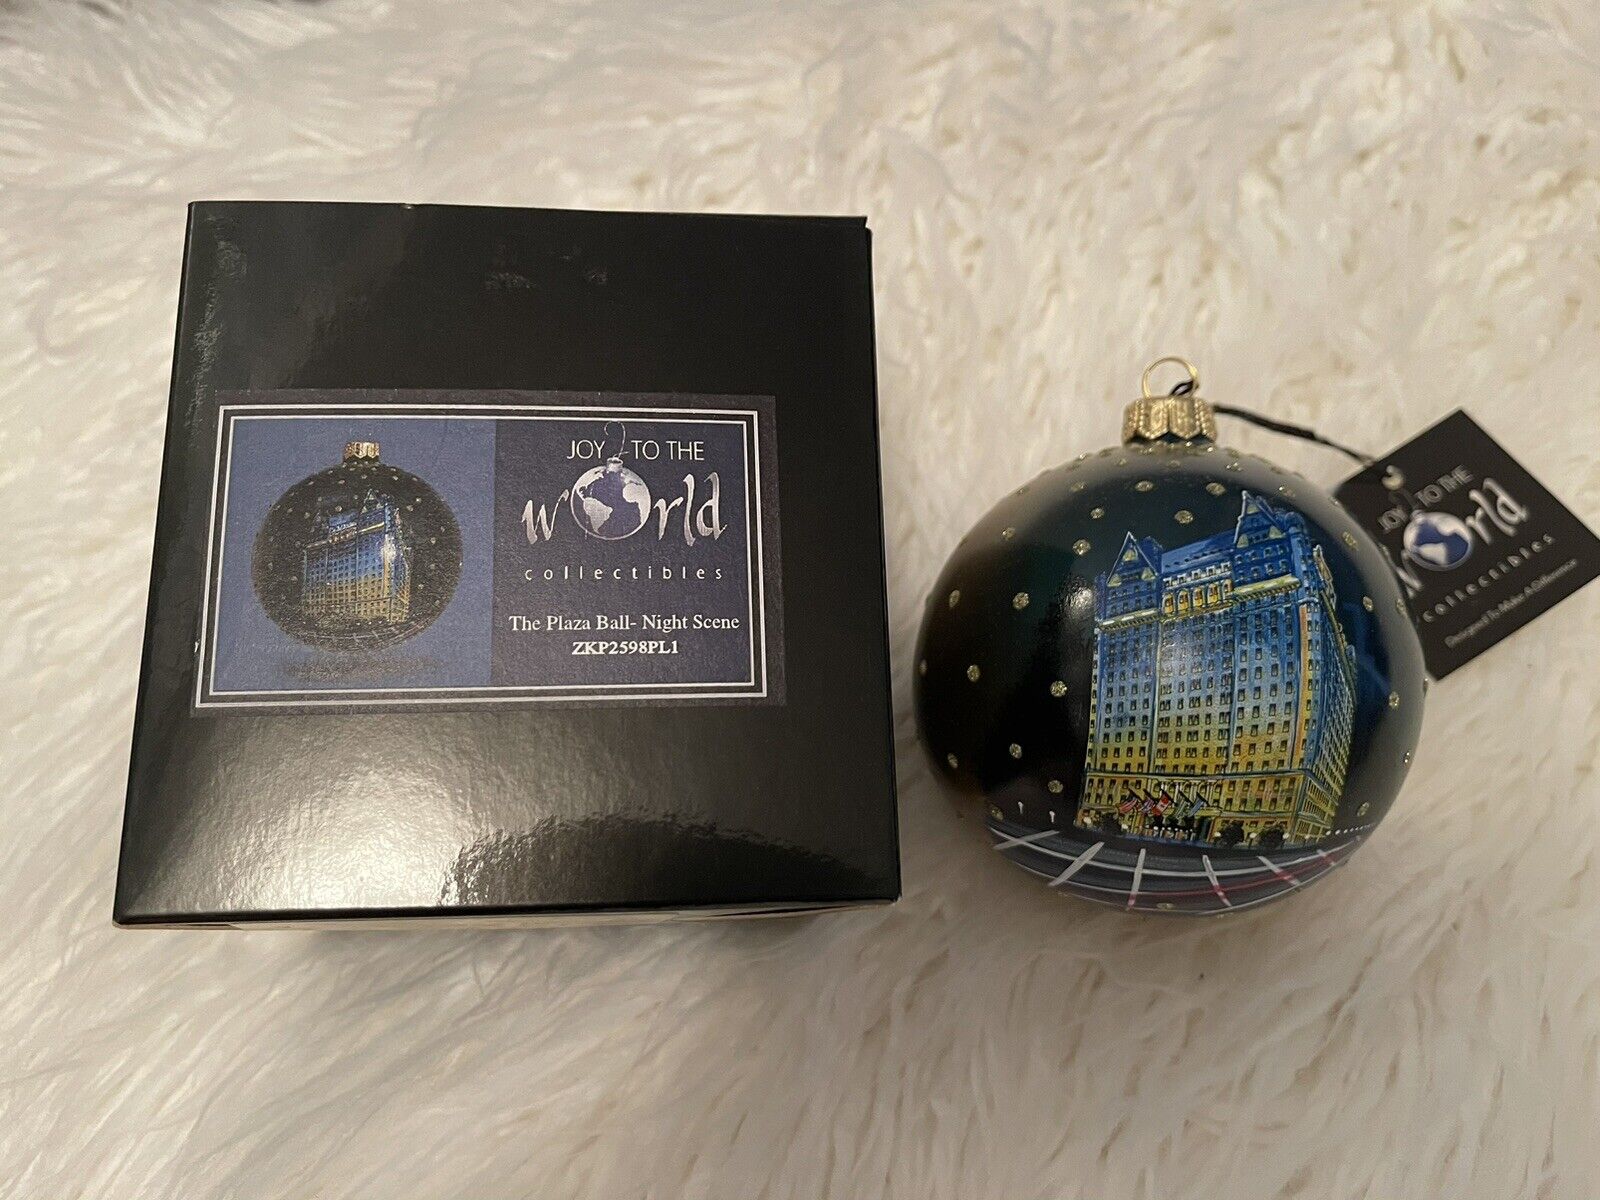 Plaza Hotel Christmas Ornament Joy To The World Collectibles Night Scene